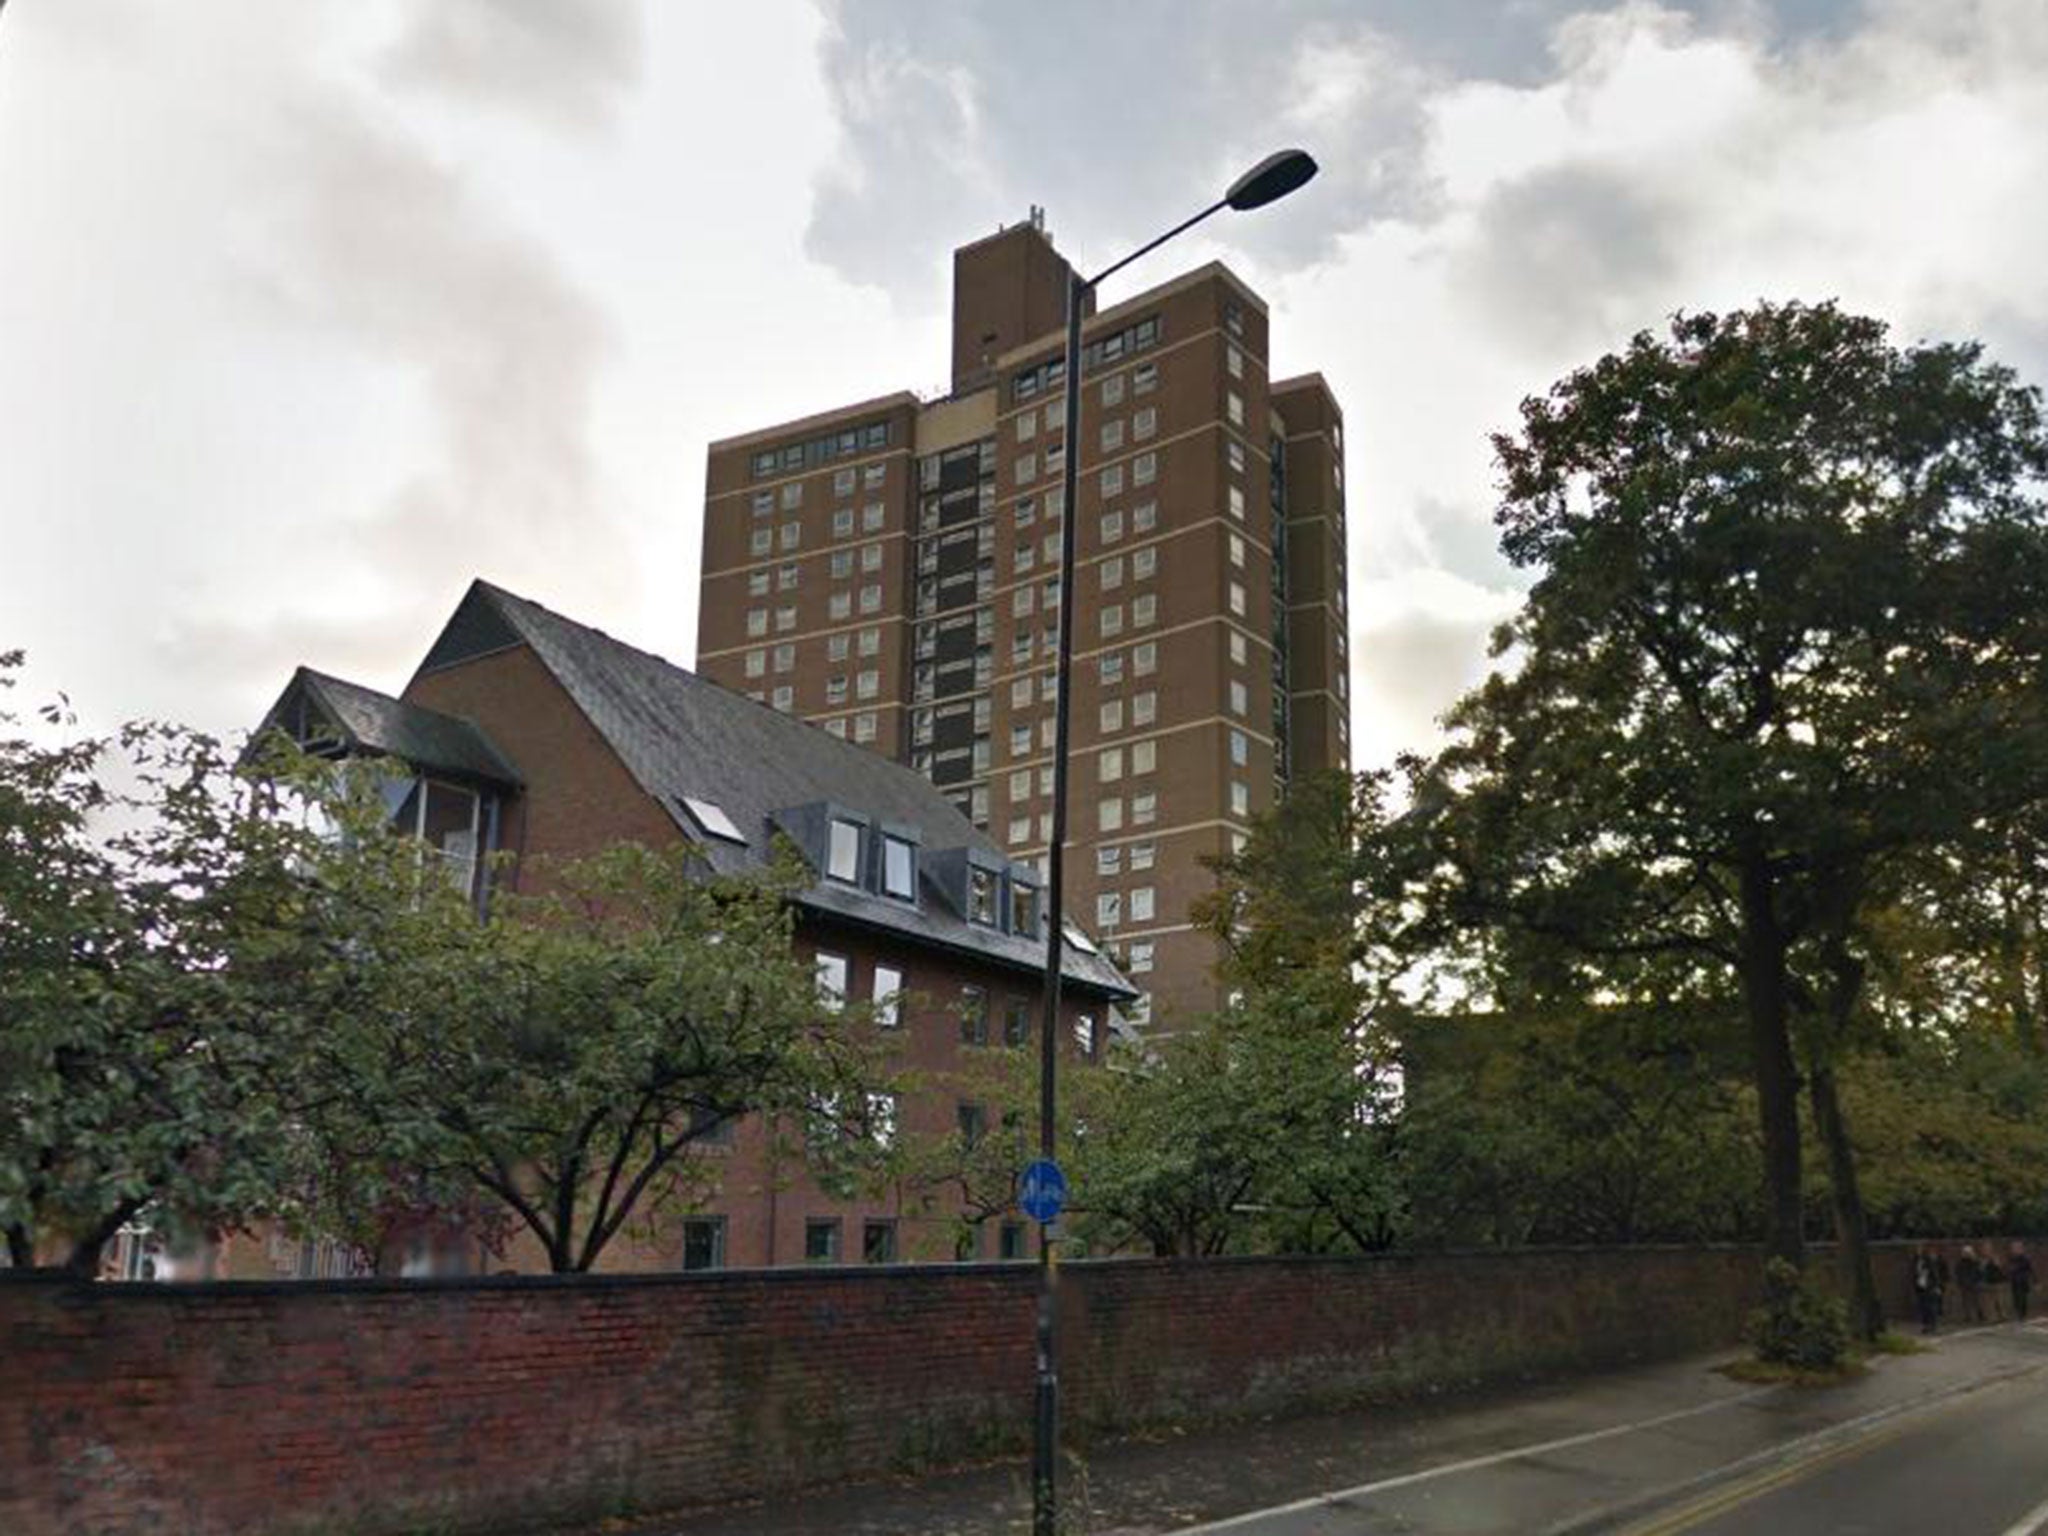 The student fell ill at "The Tower" halls at Manchester University